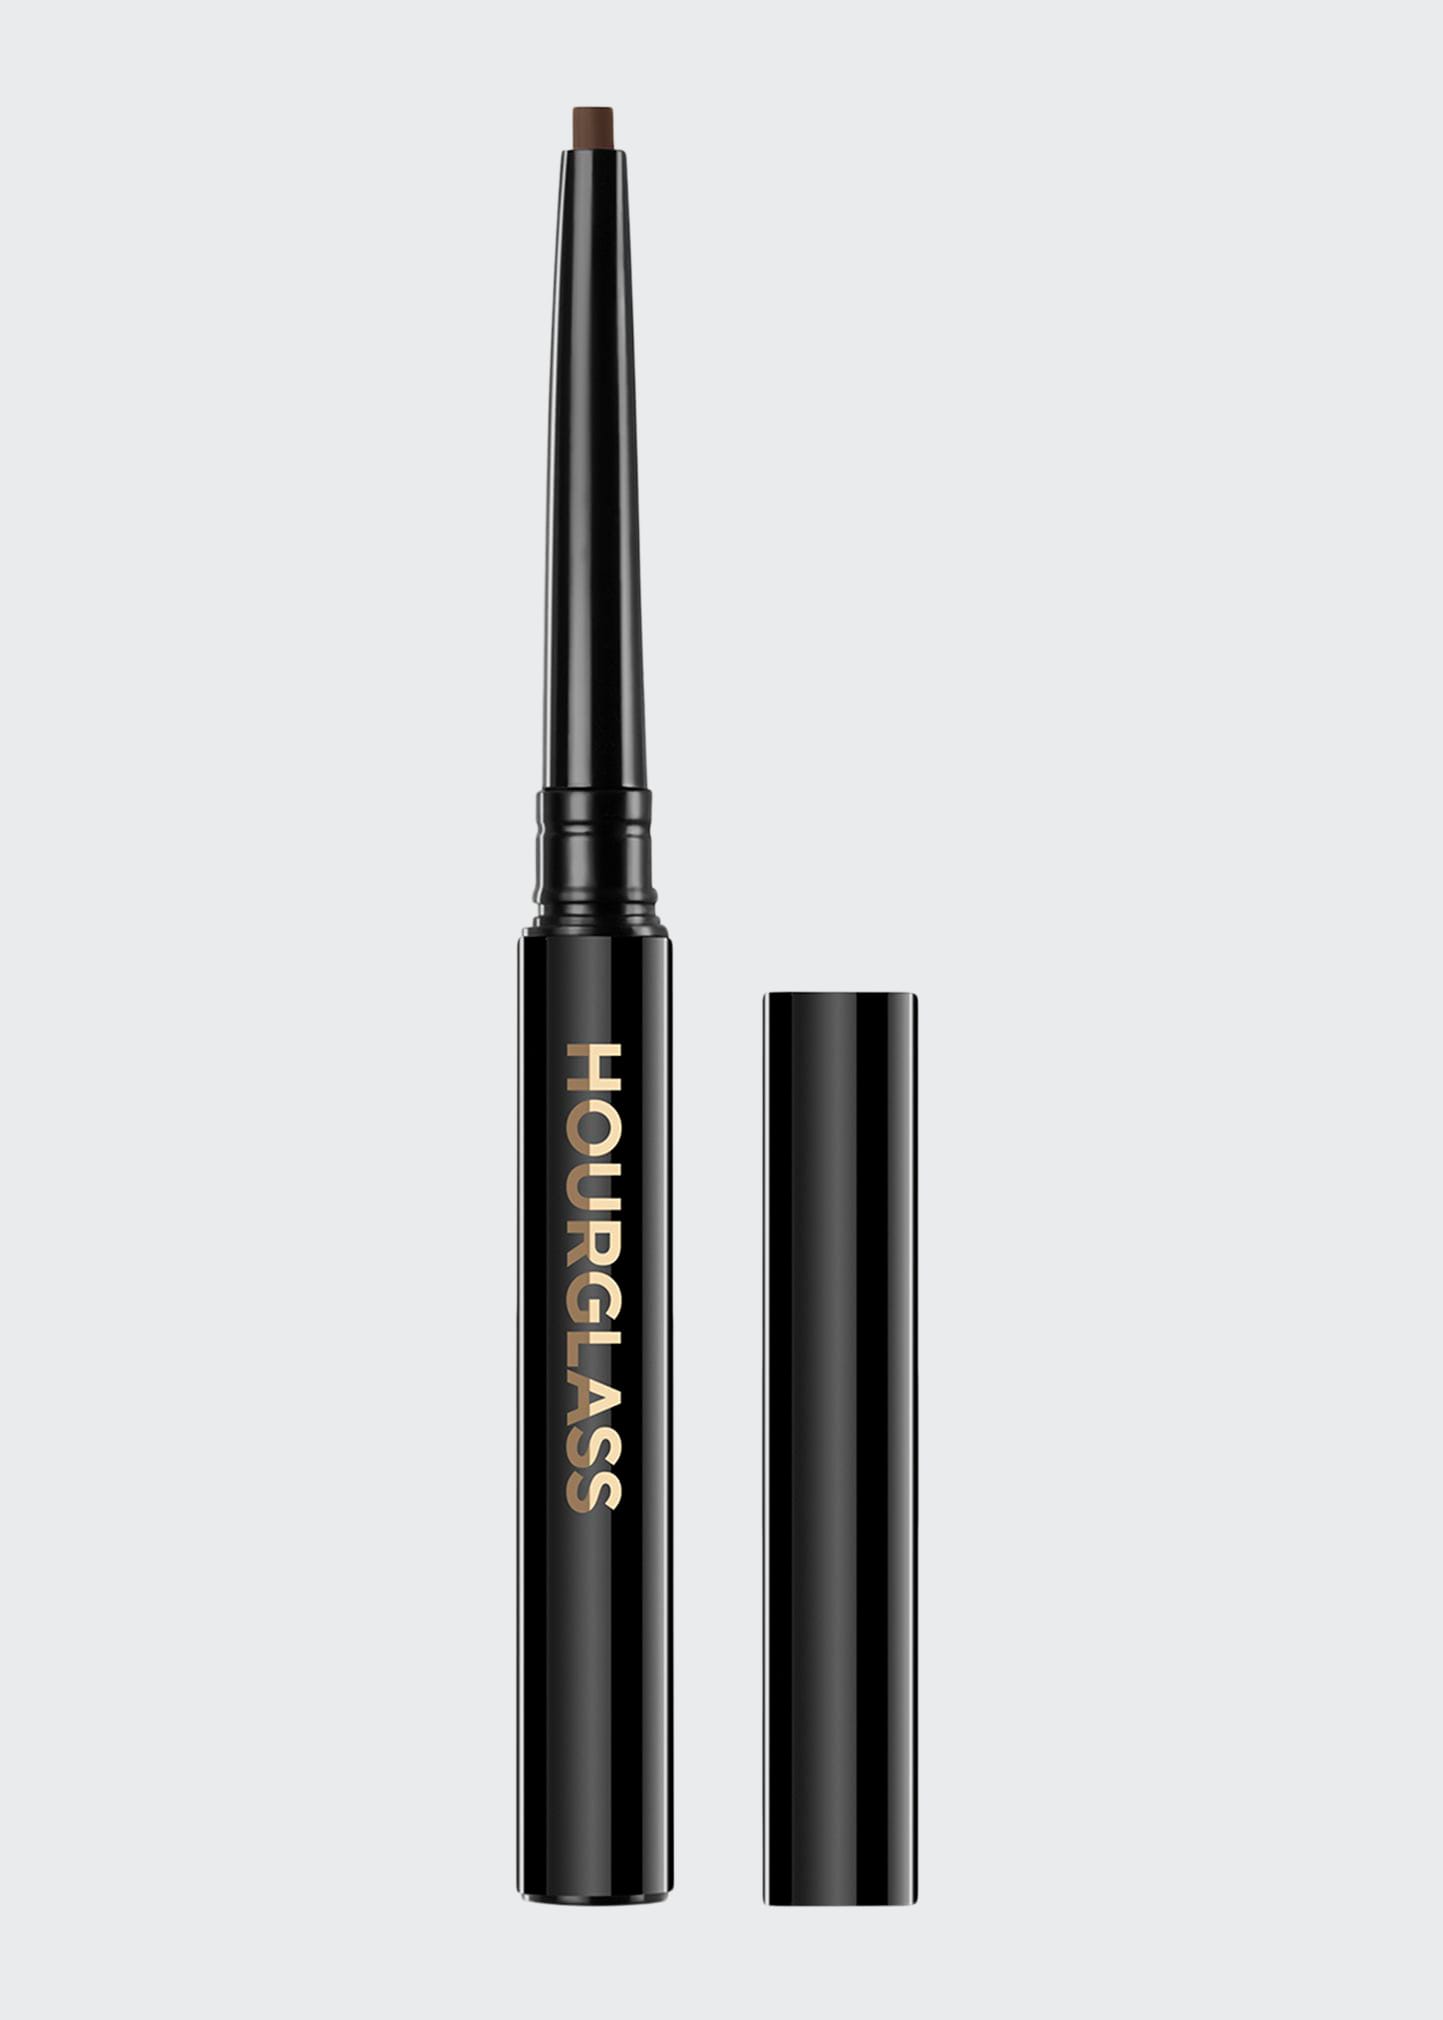 Hourglass Arch Brow Micro Sculpting Pencil, Travel Size In Dark Brunette